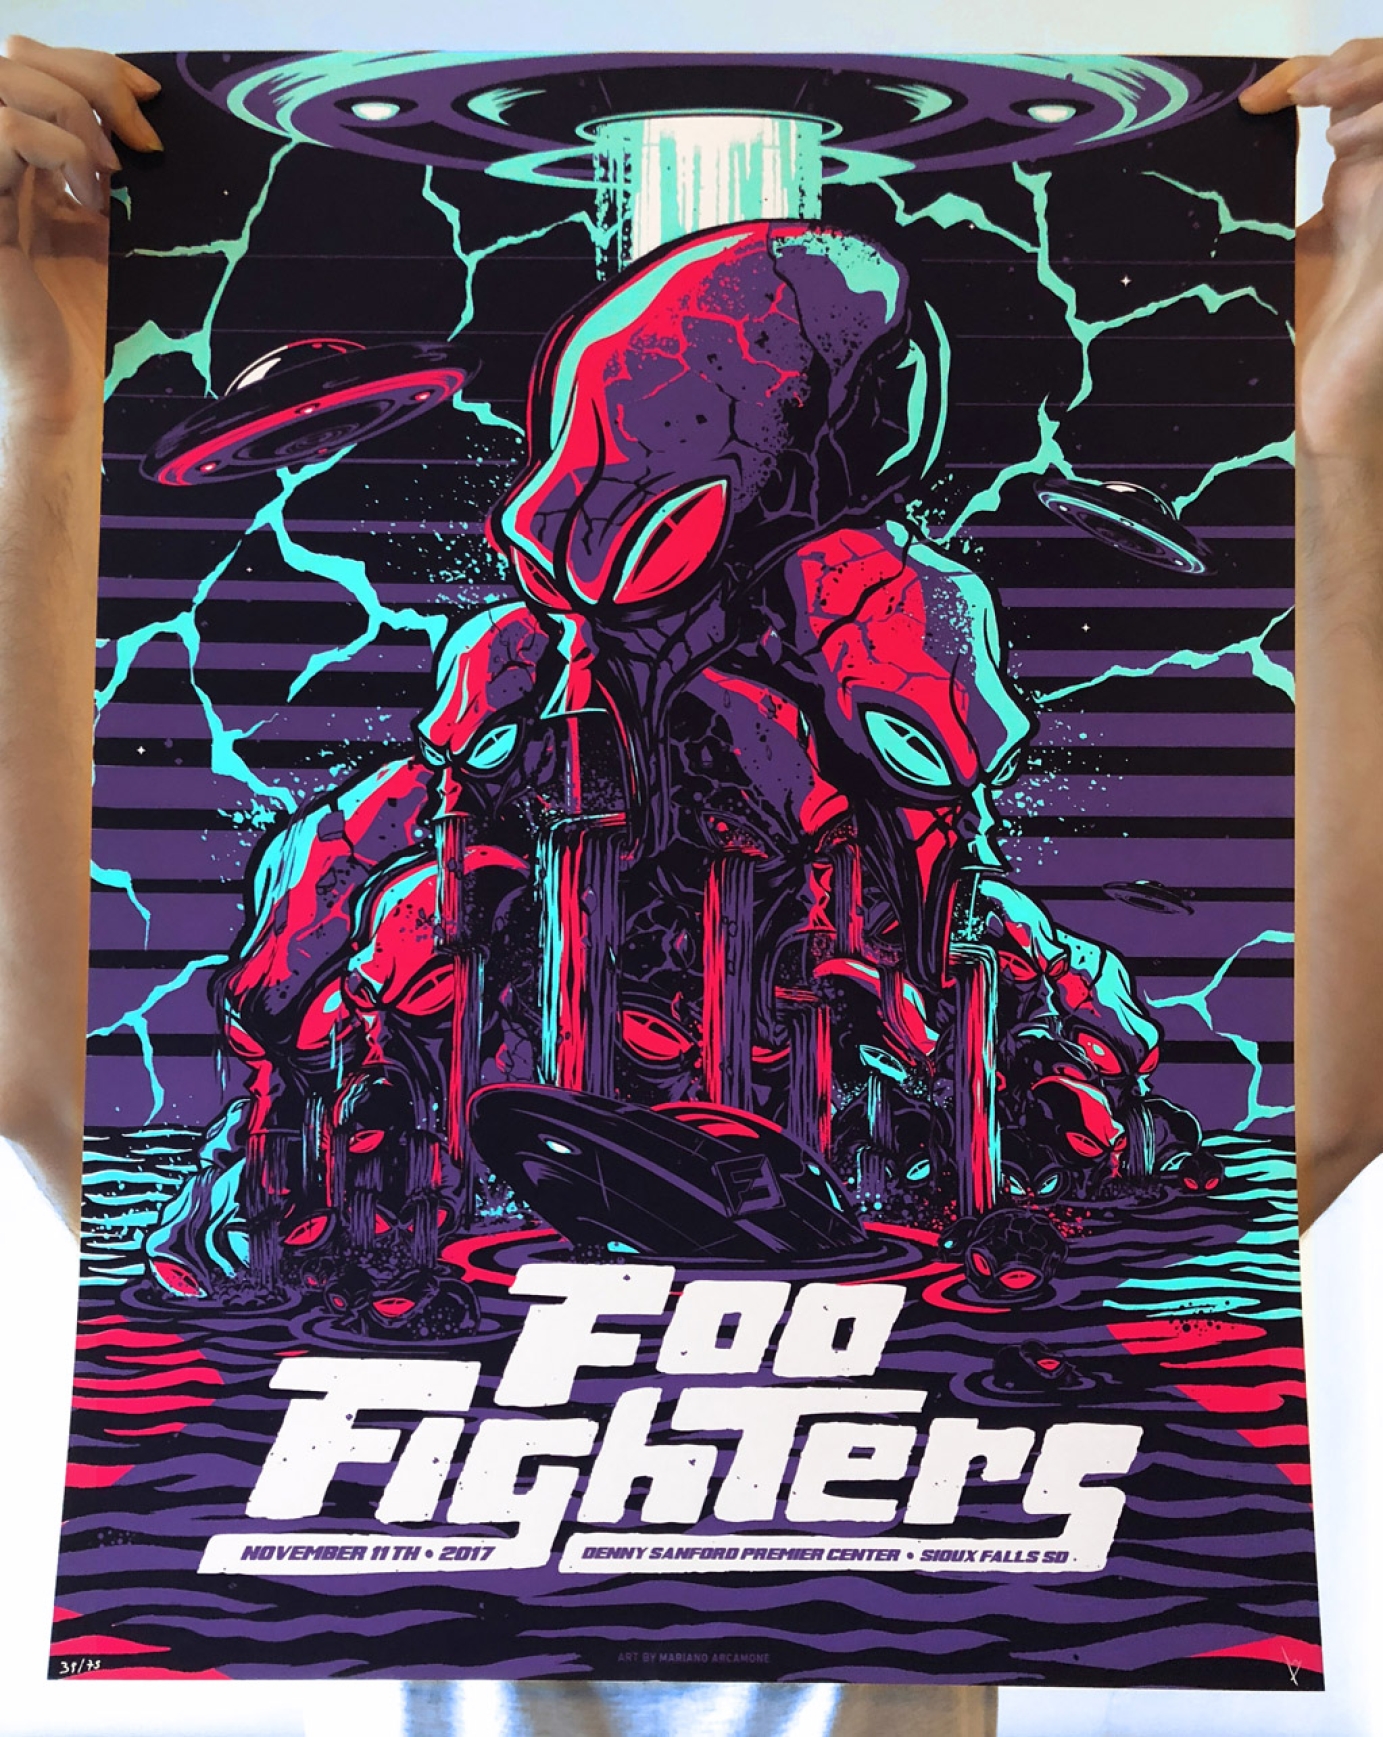 Merchandise for Foo Fighters by Mariano Arcamone